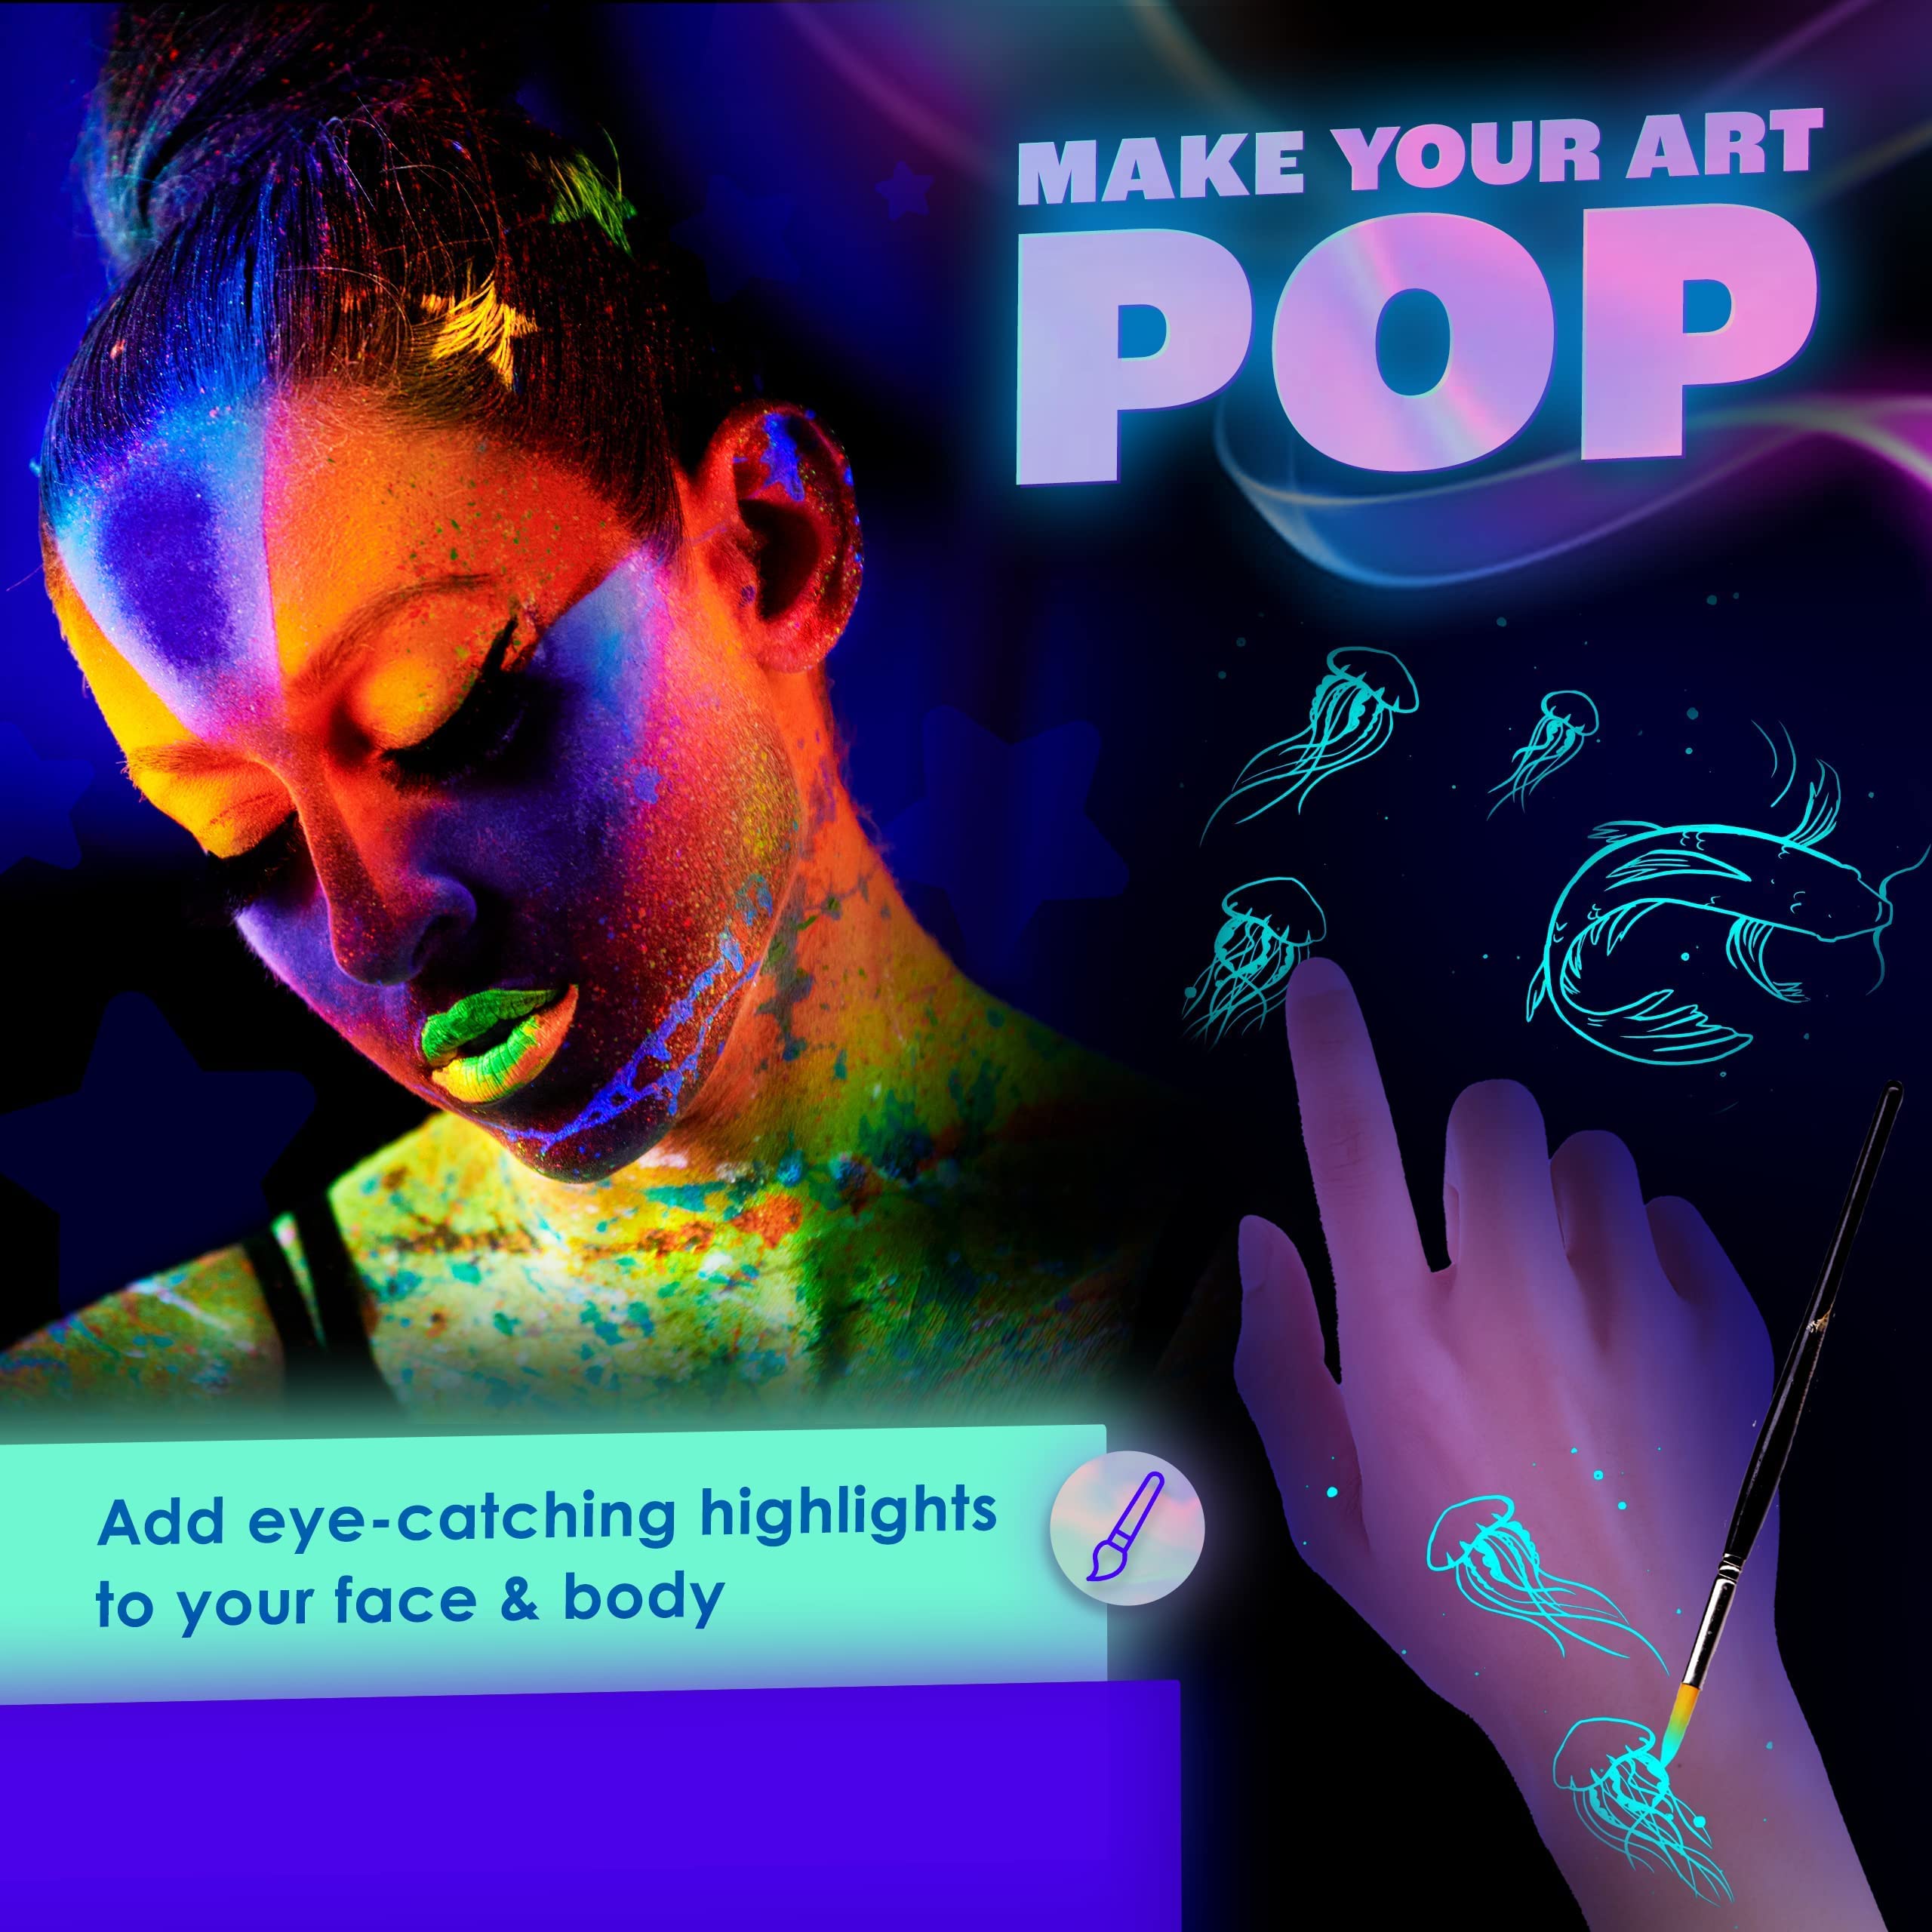 Neon Nights UV Body Paint Set | Blacklight Glow Makeup Kit | Fluorescent Face Paints for Music Festivals, Photo Shoots, Nights Out - Easy to Use and Remove, Premium Quality, Vibrant Colors | 8 Colors